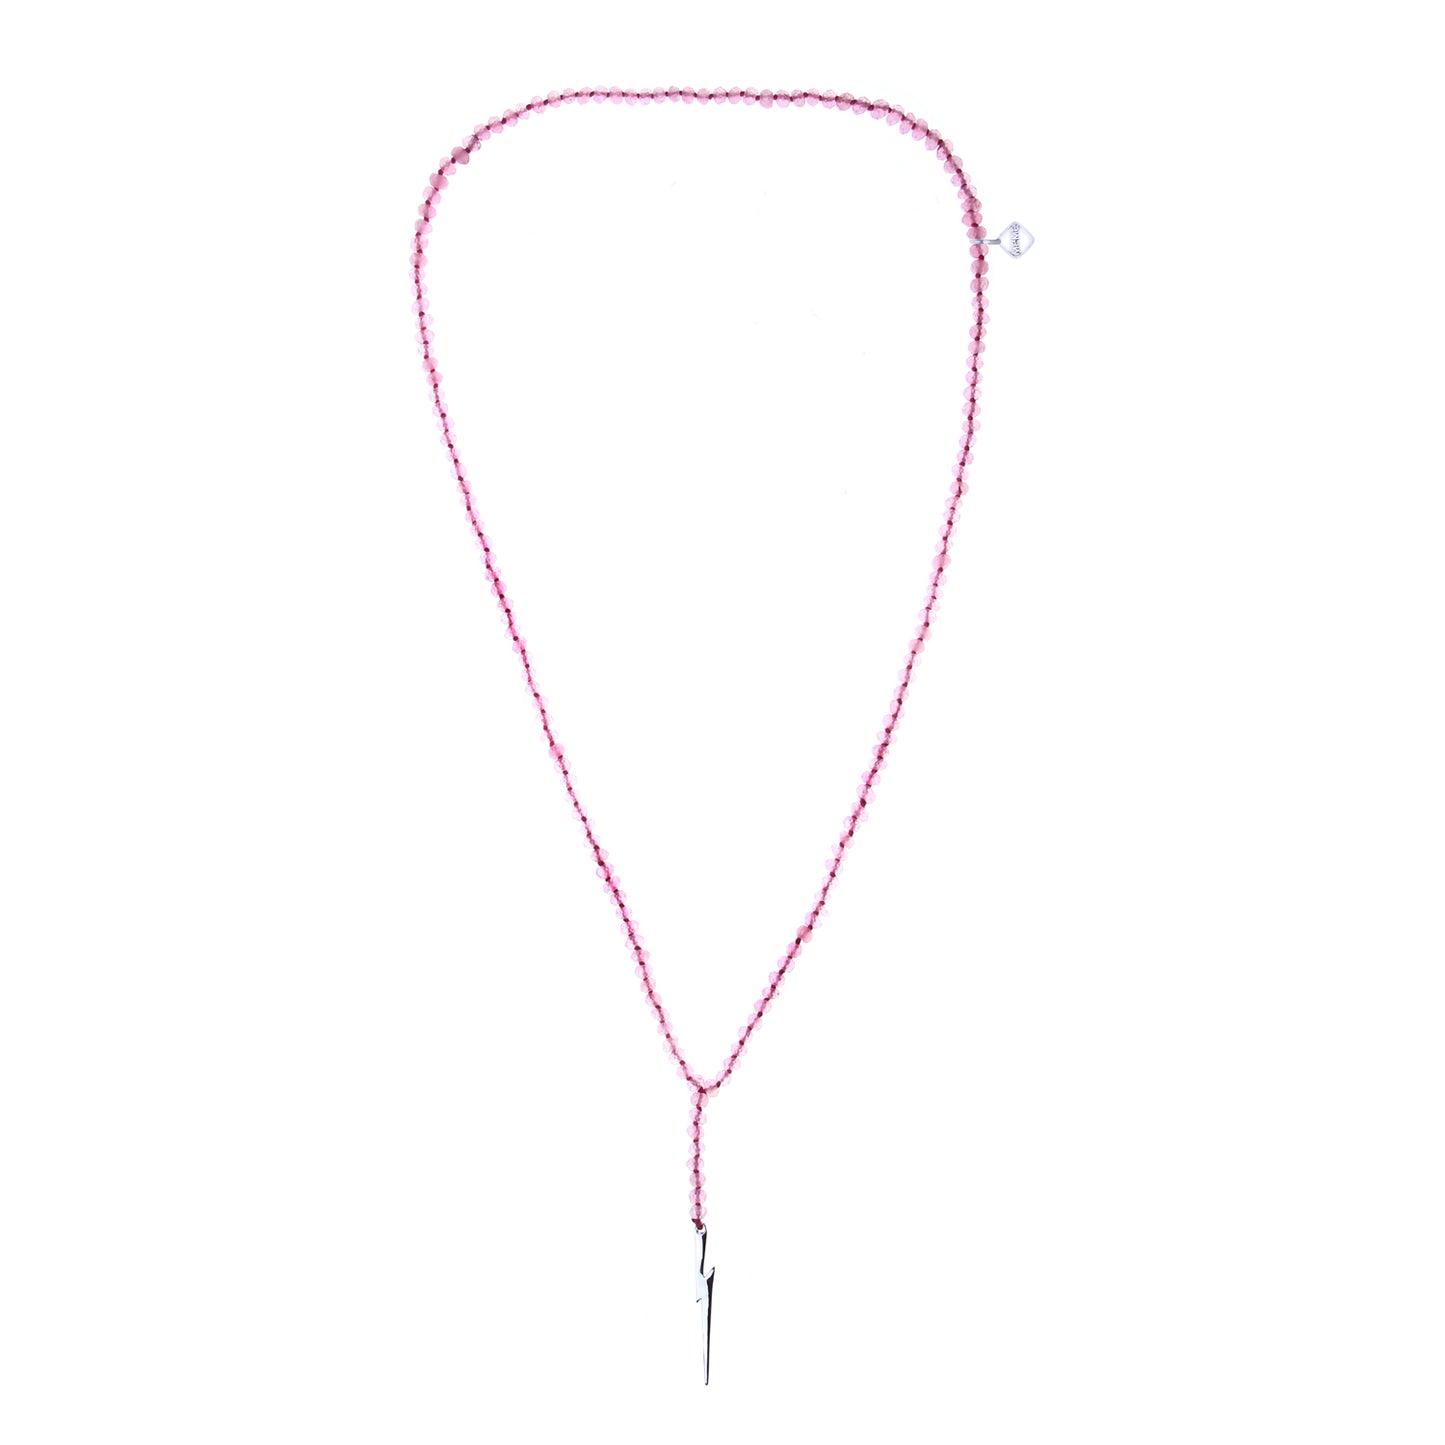 MeMe London Light Me Up Necklace - Pink with White Gold